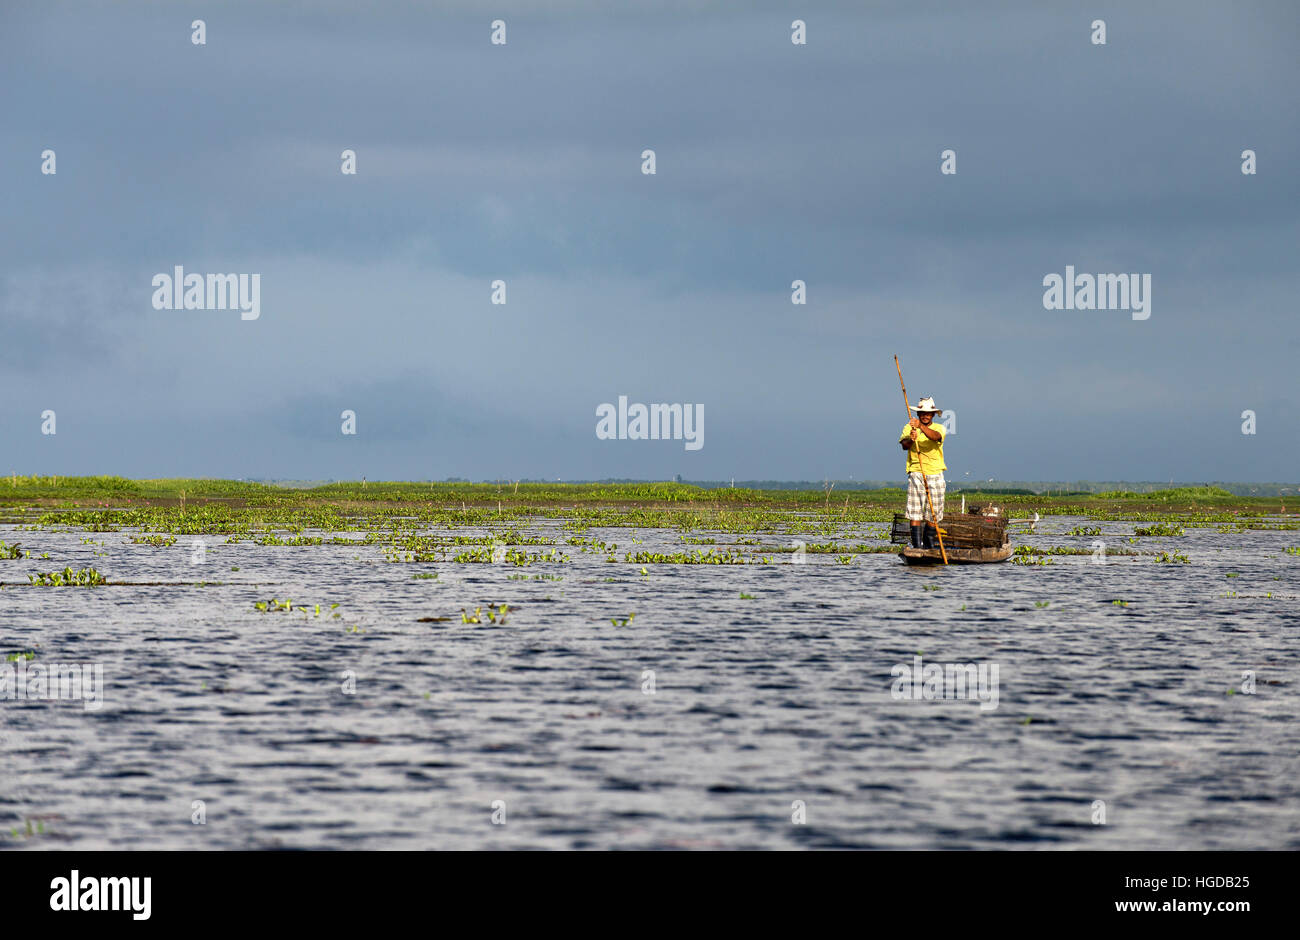 Thailand, Patthalung, Tale Noi, Fisherman, on boat with fish traps Stock Photo